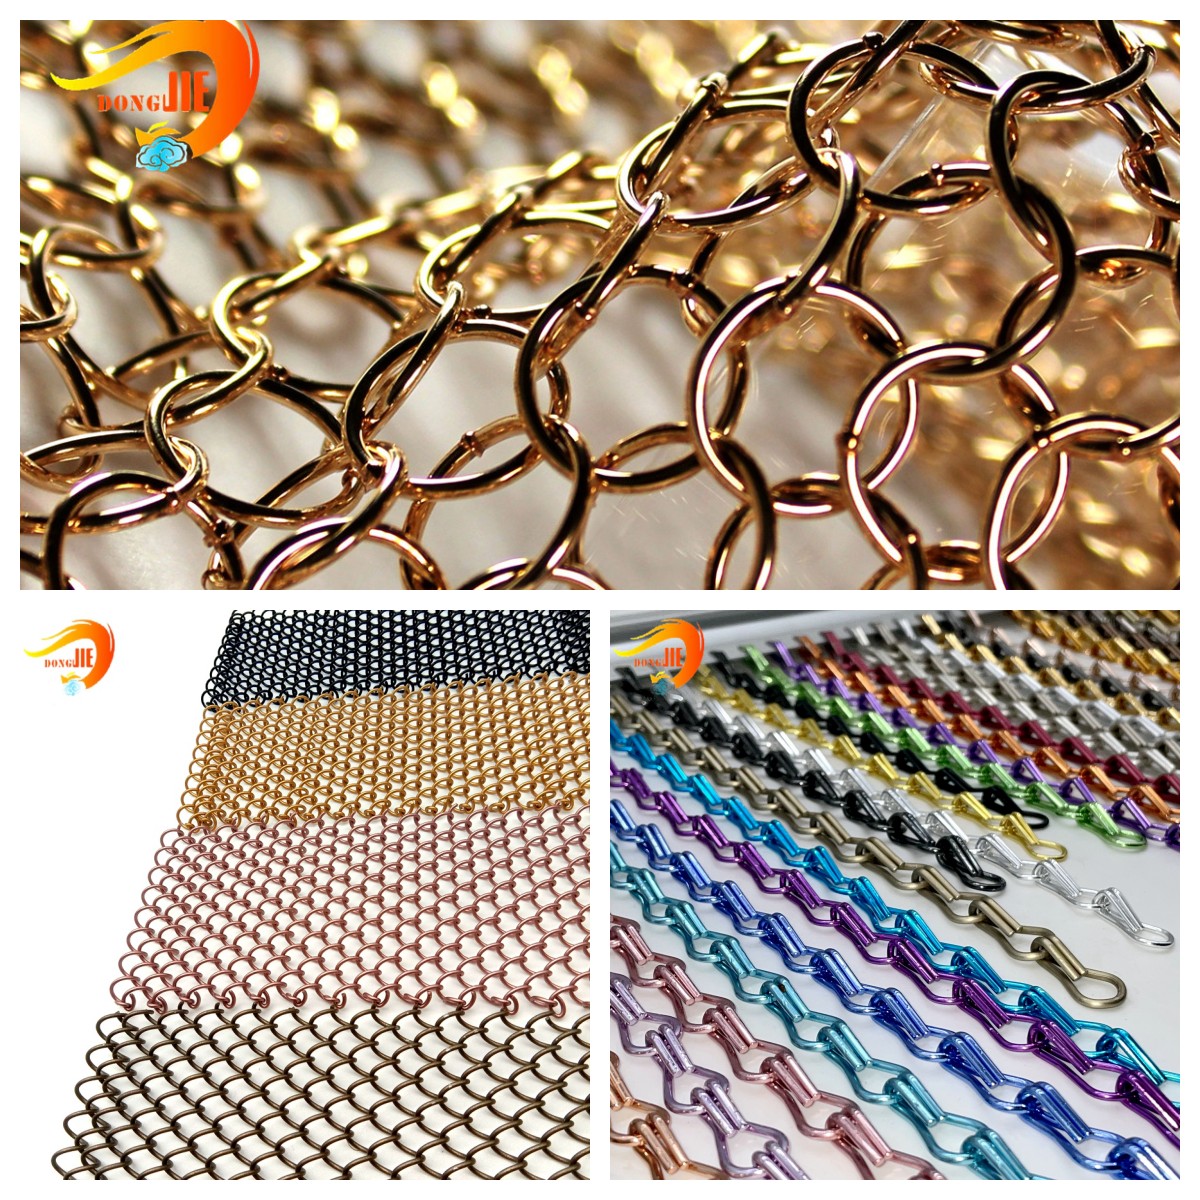 Have you tried curtain metal mesh?